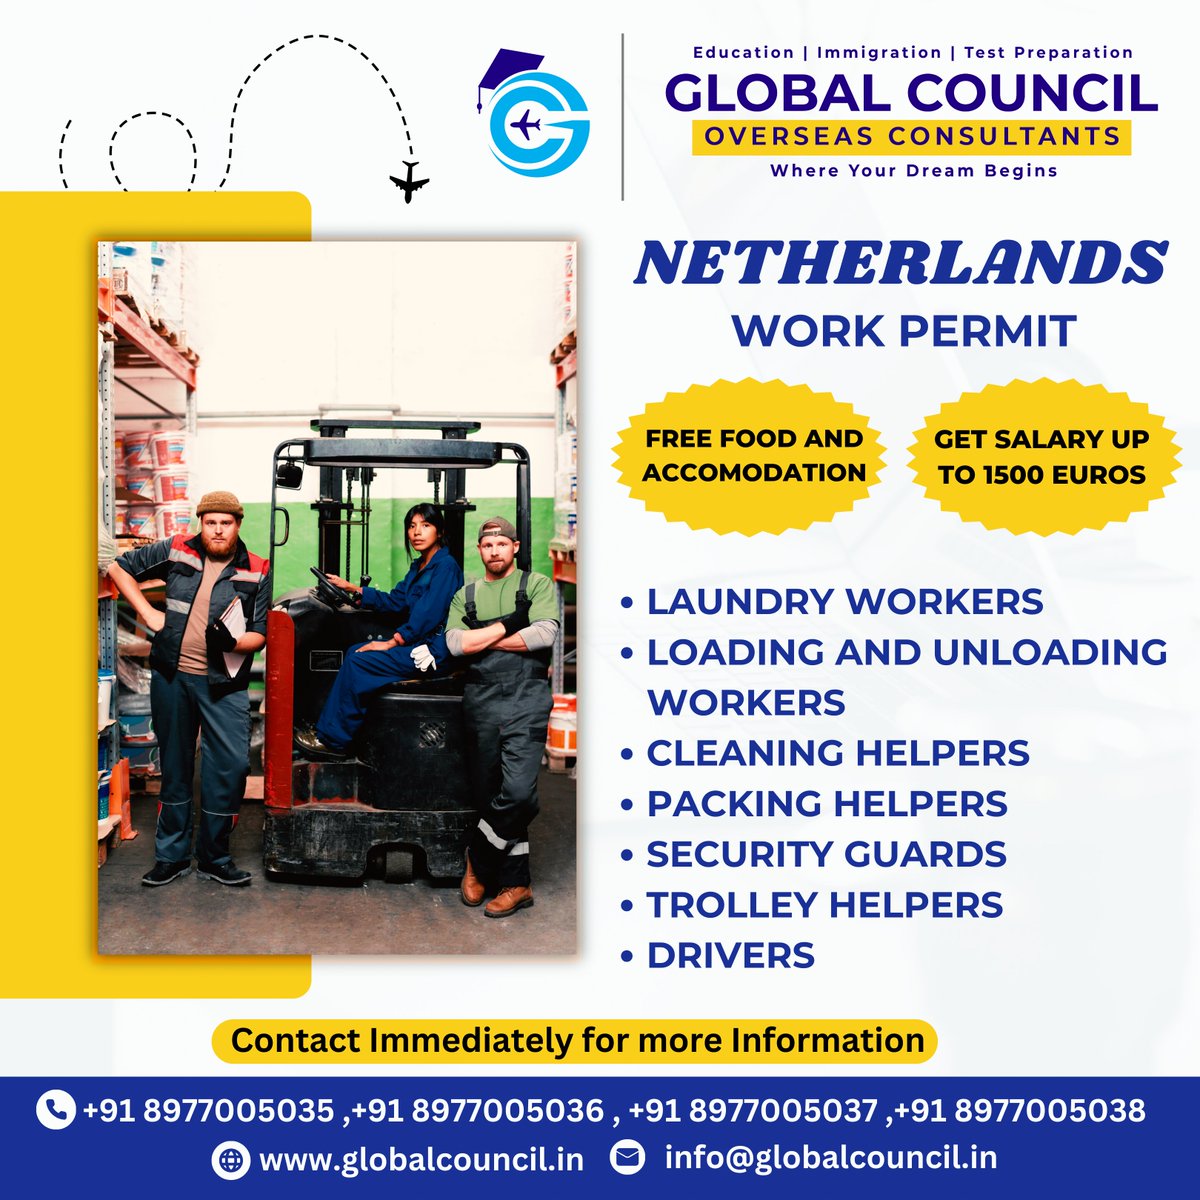 Are you ready to kick-start your career or find a new adventure in the vibrant Netherlands?
.
.
.
#studyingermany #sudy #nethrlands #workvisa #workinabroad #jobvacancy #jobsearch #jobseekers #workpermit #usaworkpermit #ukworkpermit